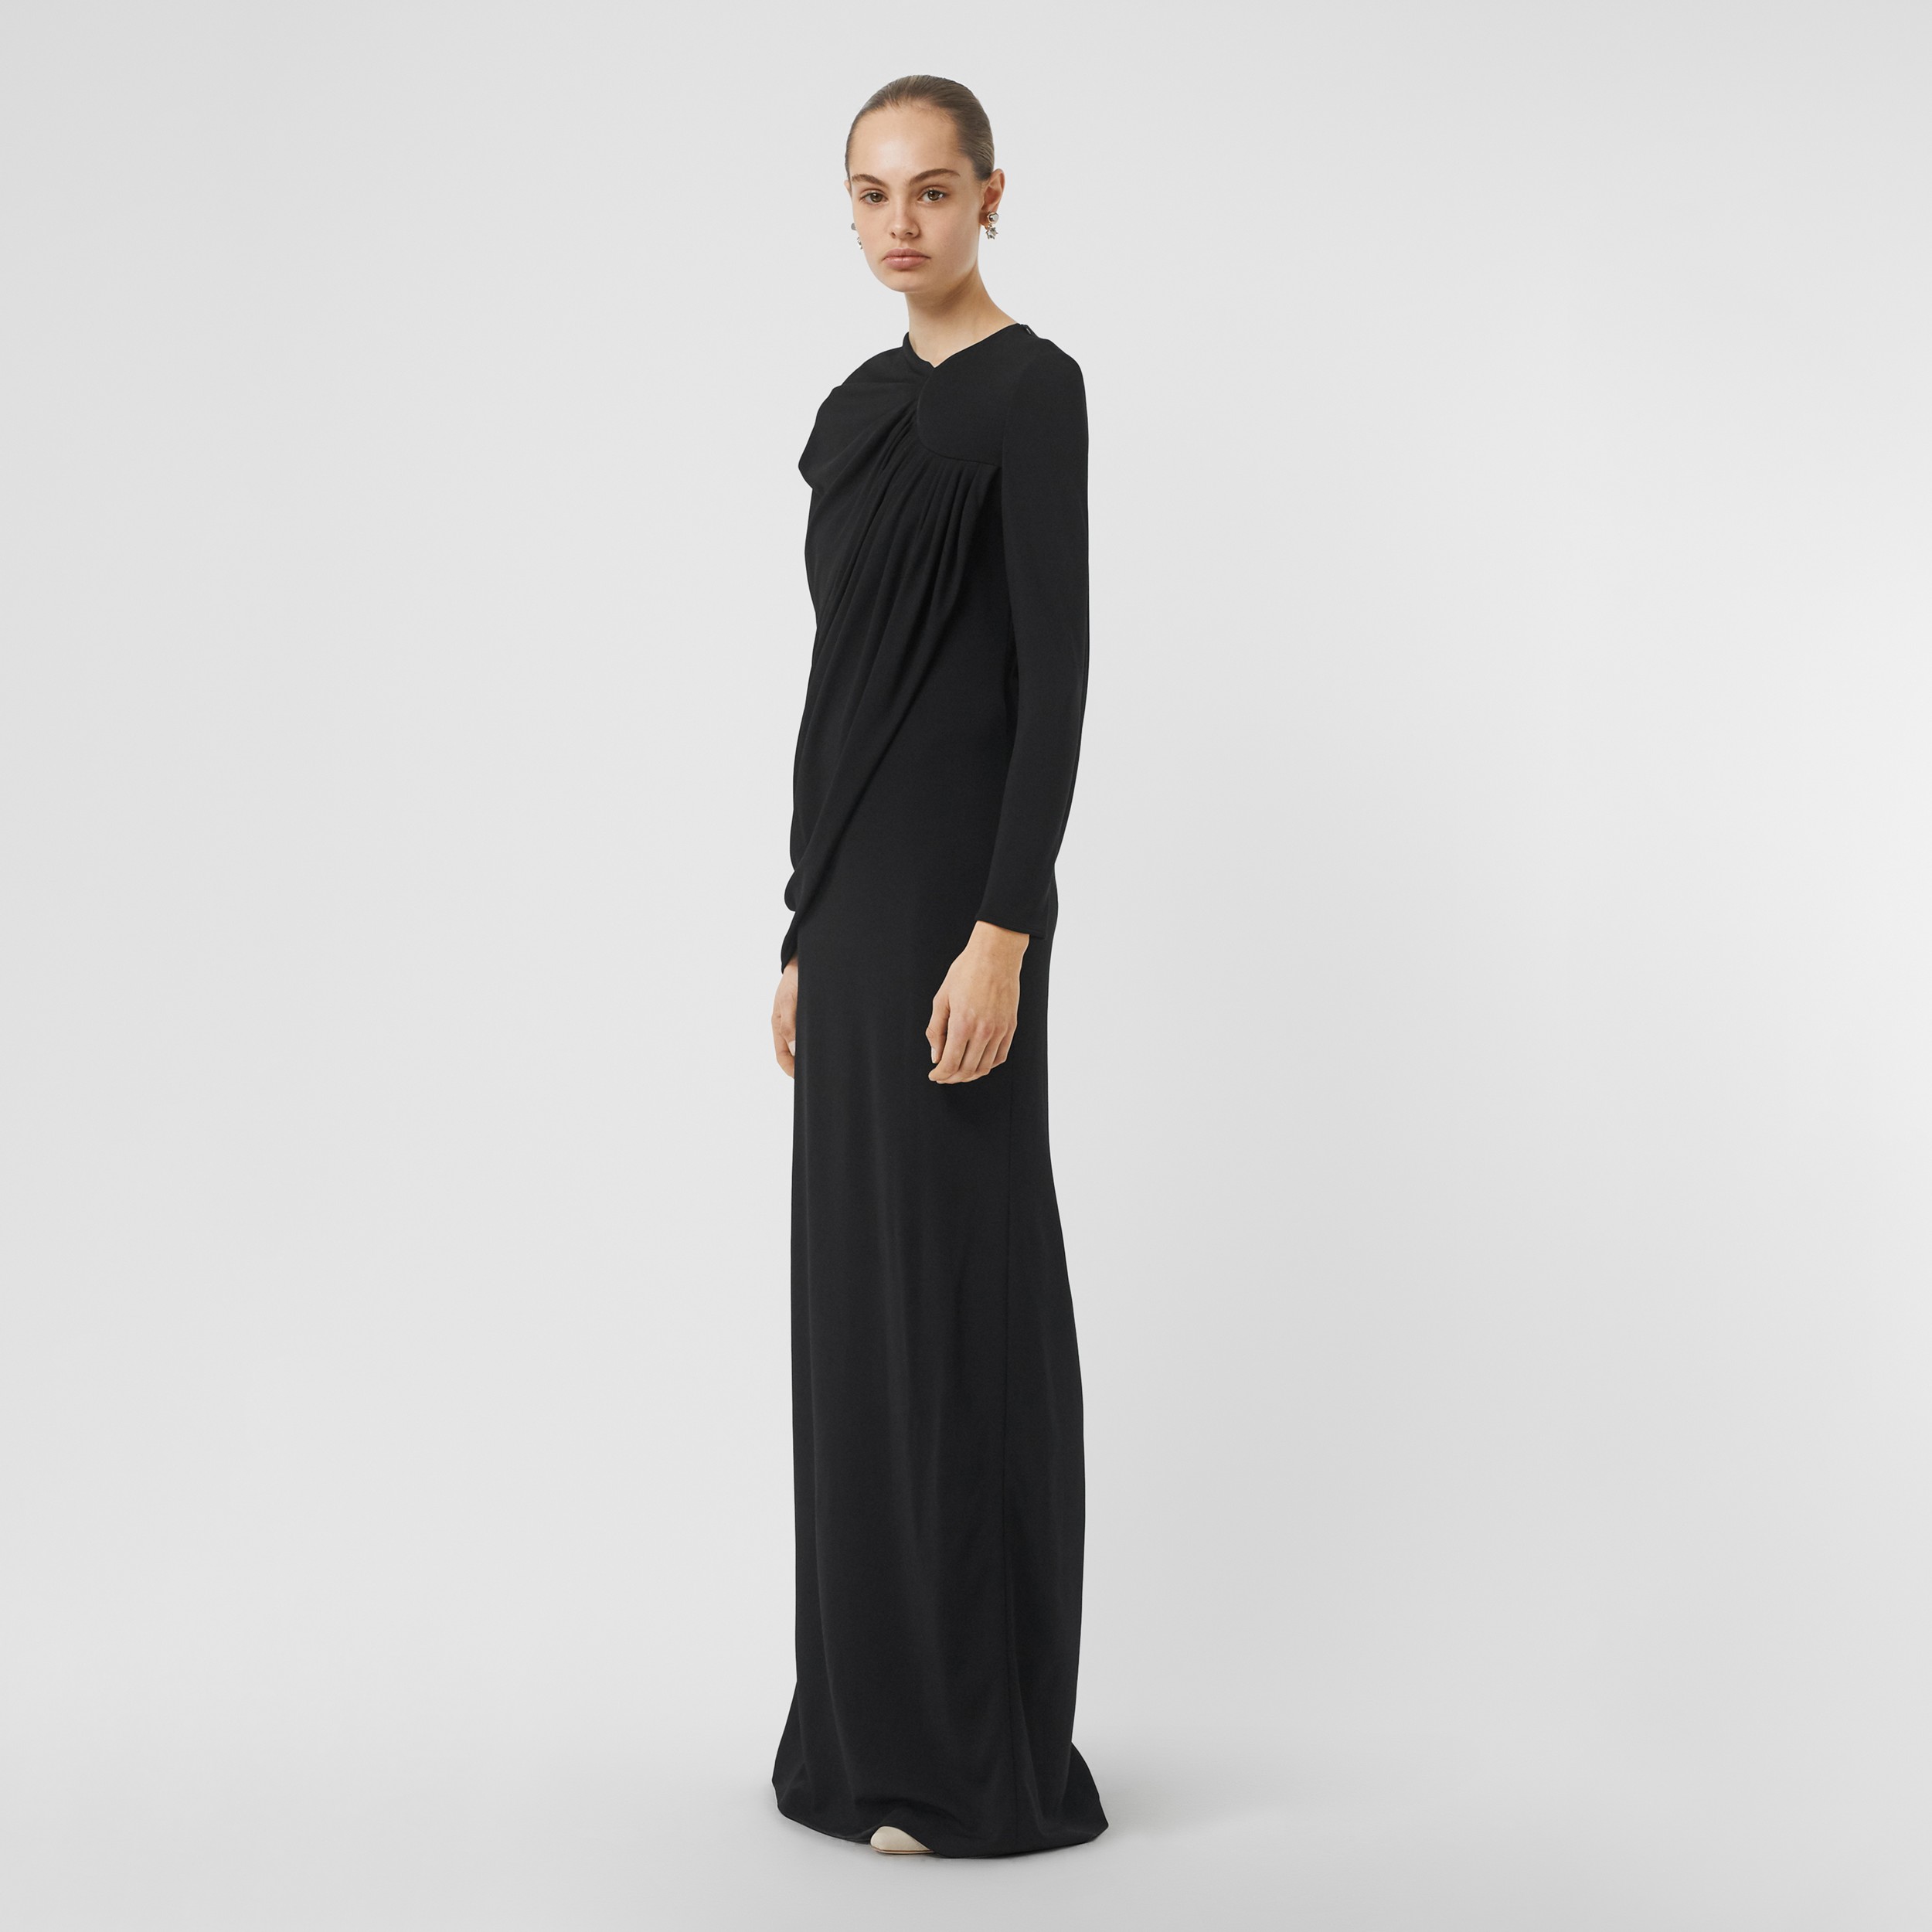 Cape-sleeve Stretch Jersey Gown in Black - Women | Burberry United States